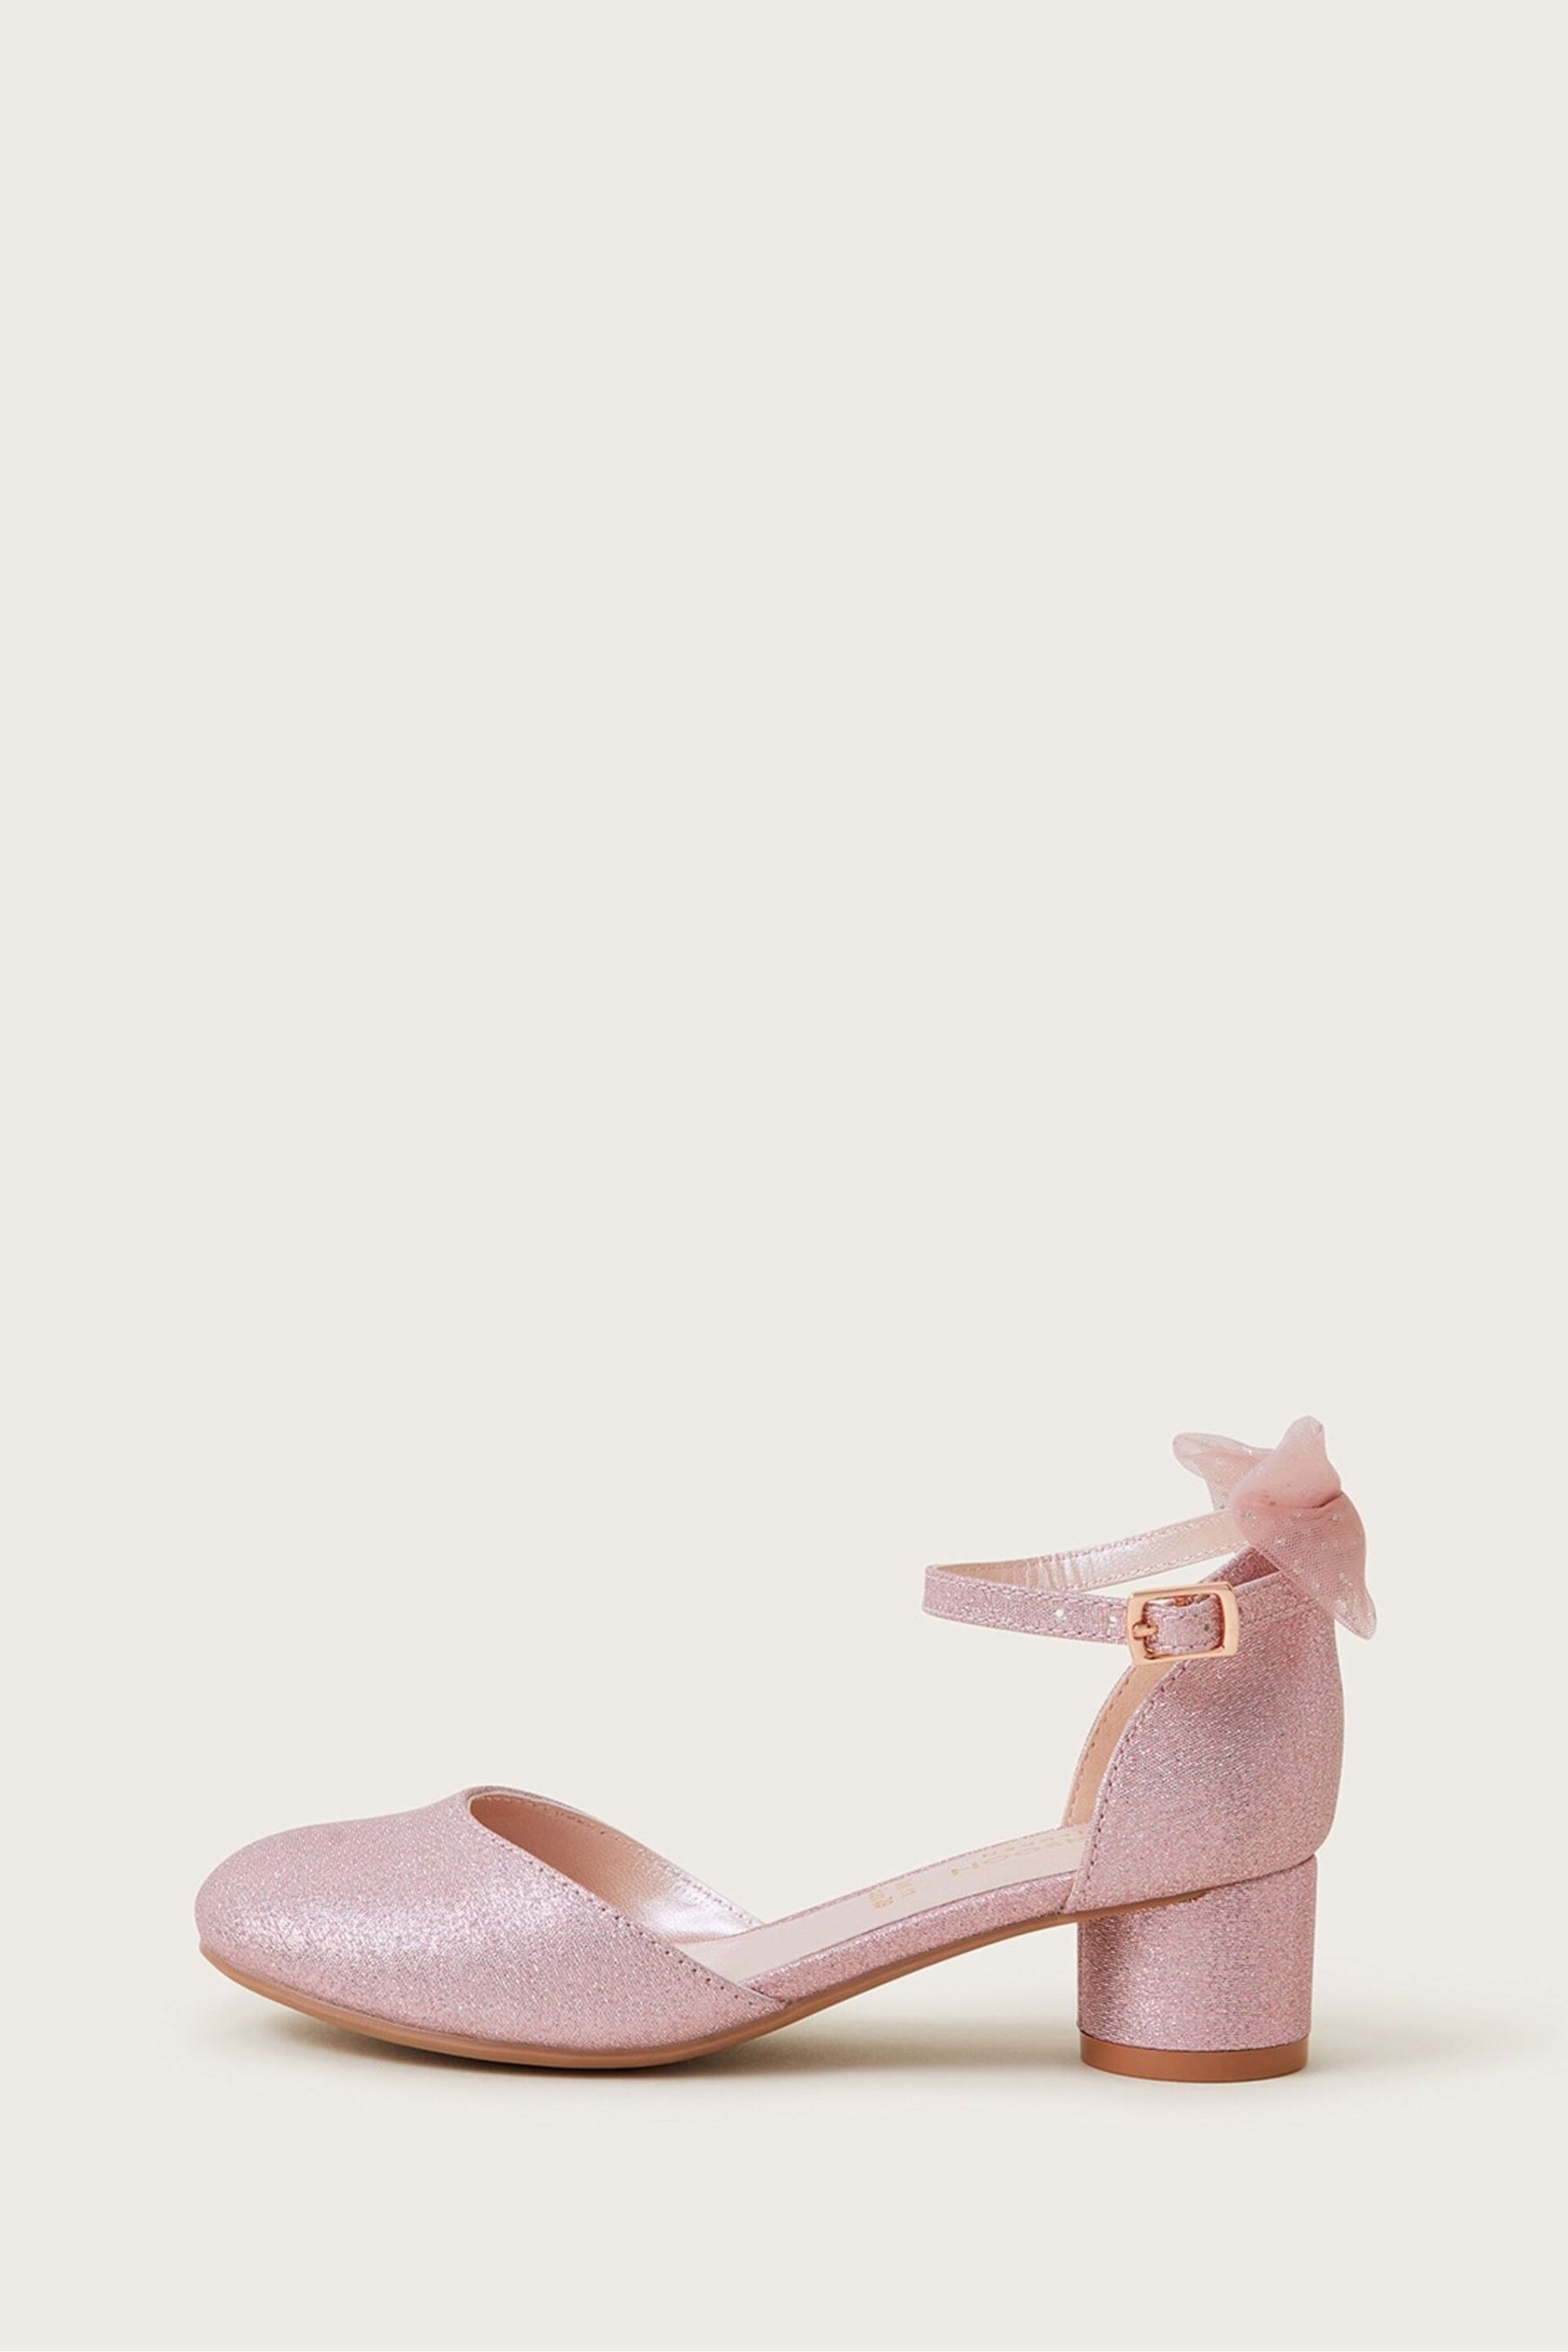 Monsoon Pink Two-Part Bow Heels - Image 1 of 3